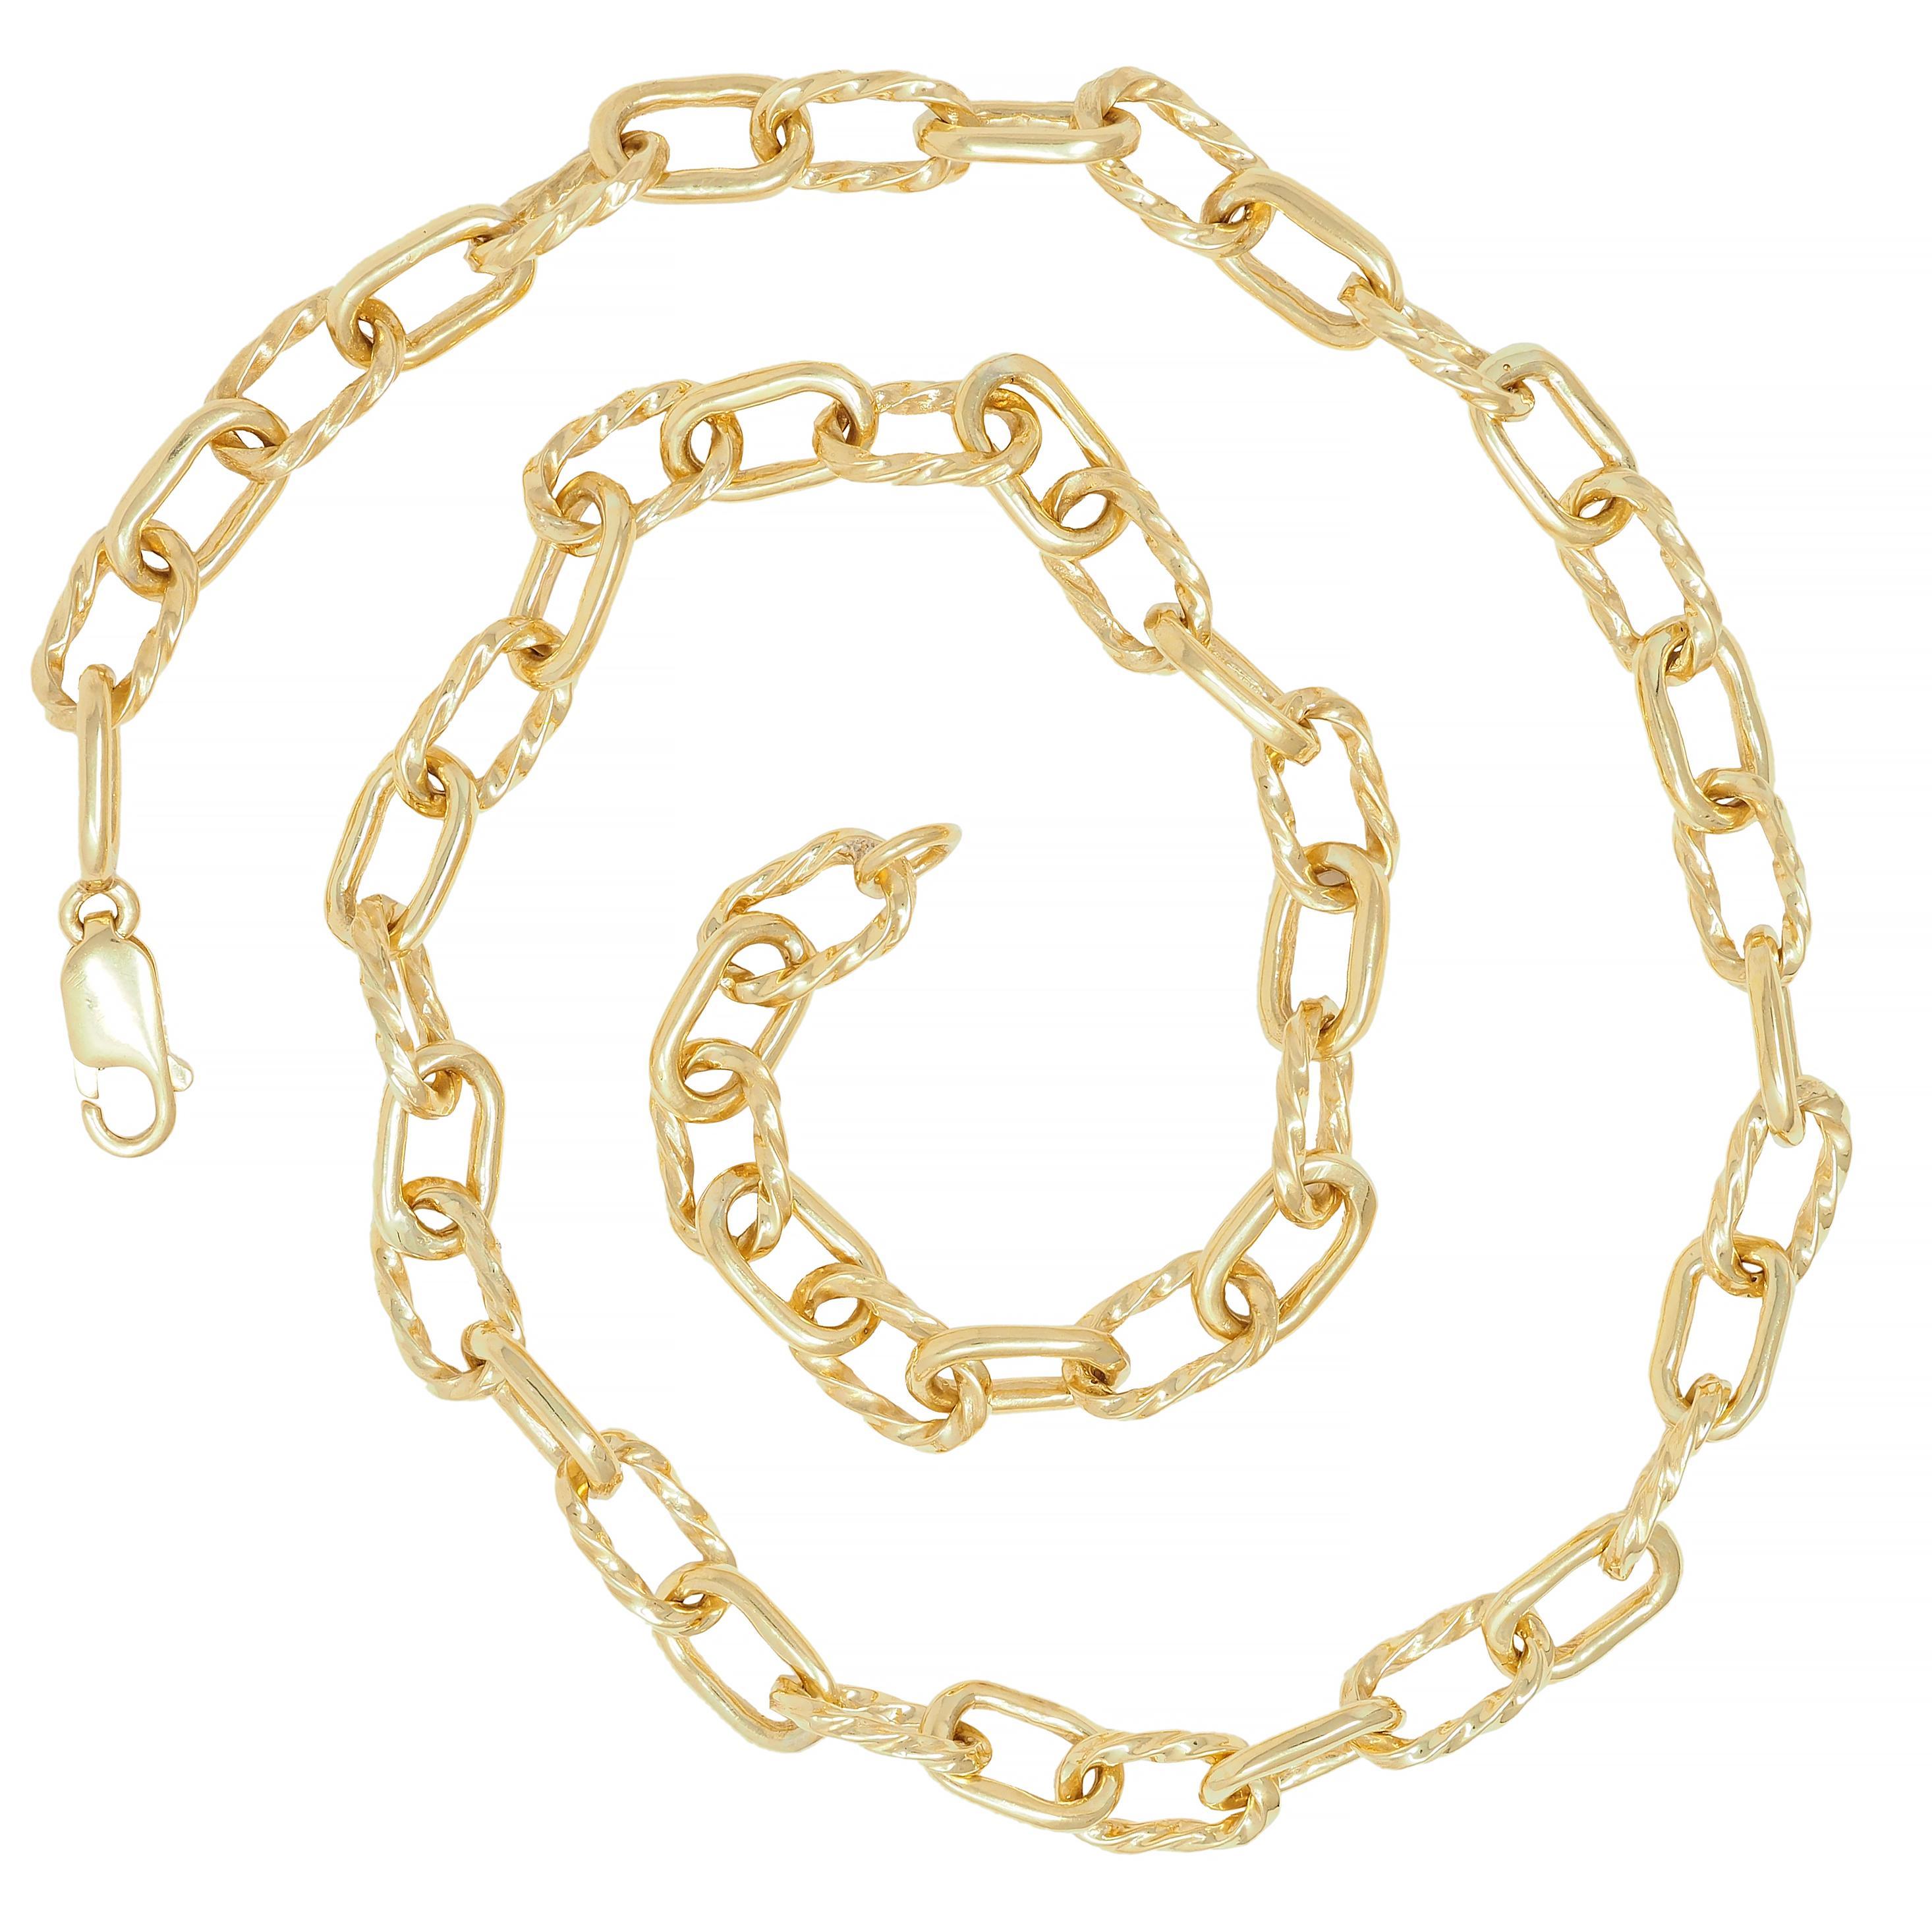 Comprised of oval-shaped cable link chain 
Alternating with twisted rope motif links 
With high polish finish
Completed by lobster clasp closure
Stamped for 18 karat gold 
Circa: 1960s
Width at widest: 5/16 inch
Length: 19 inches
Total weight: 55.2